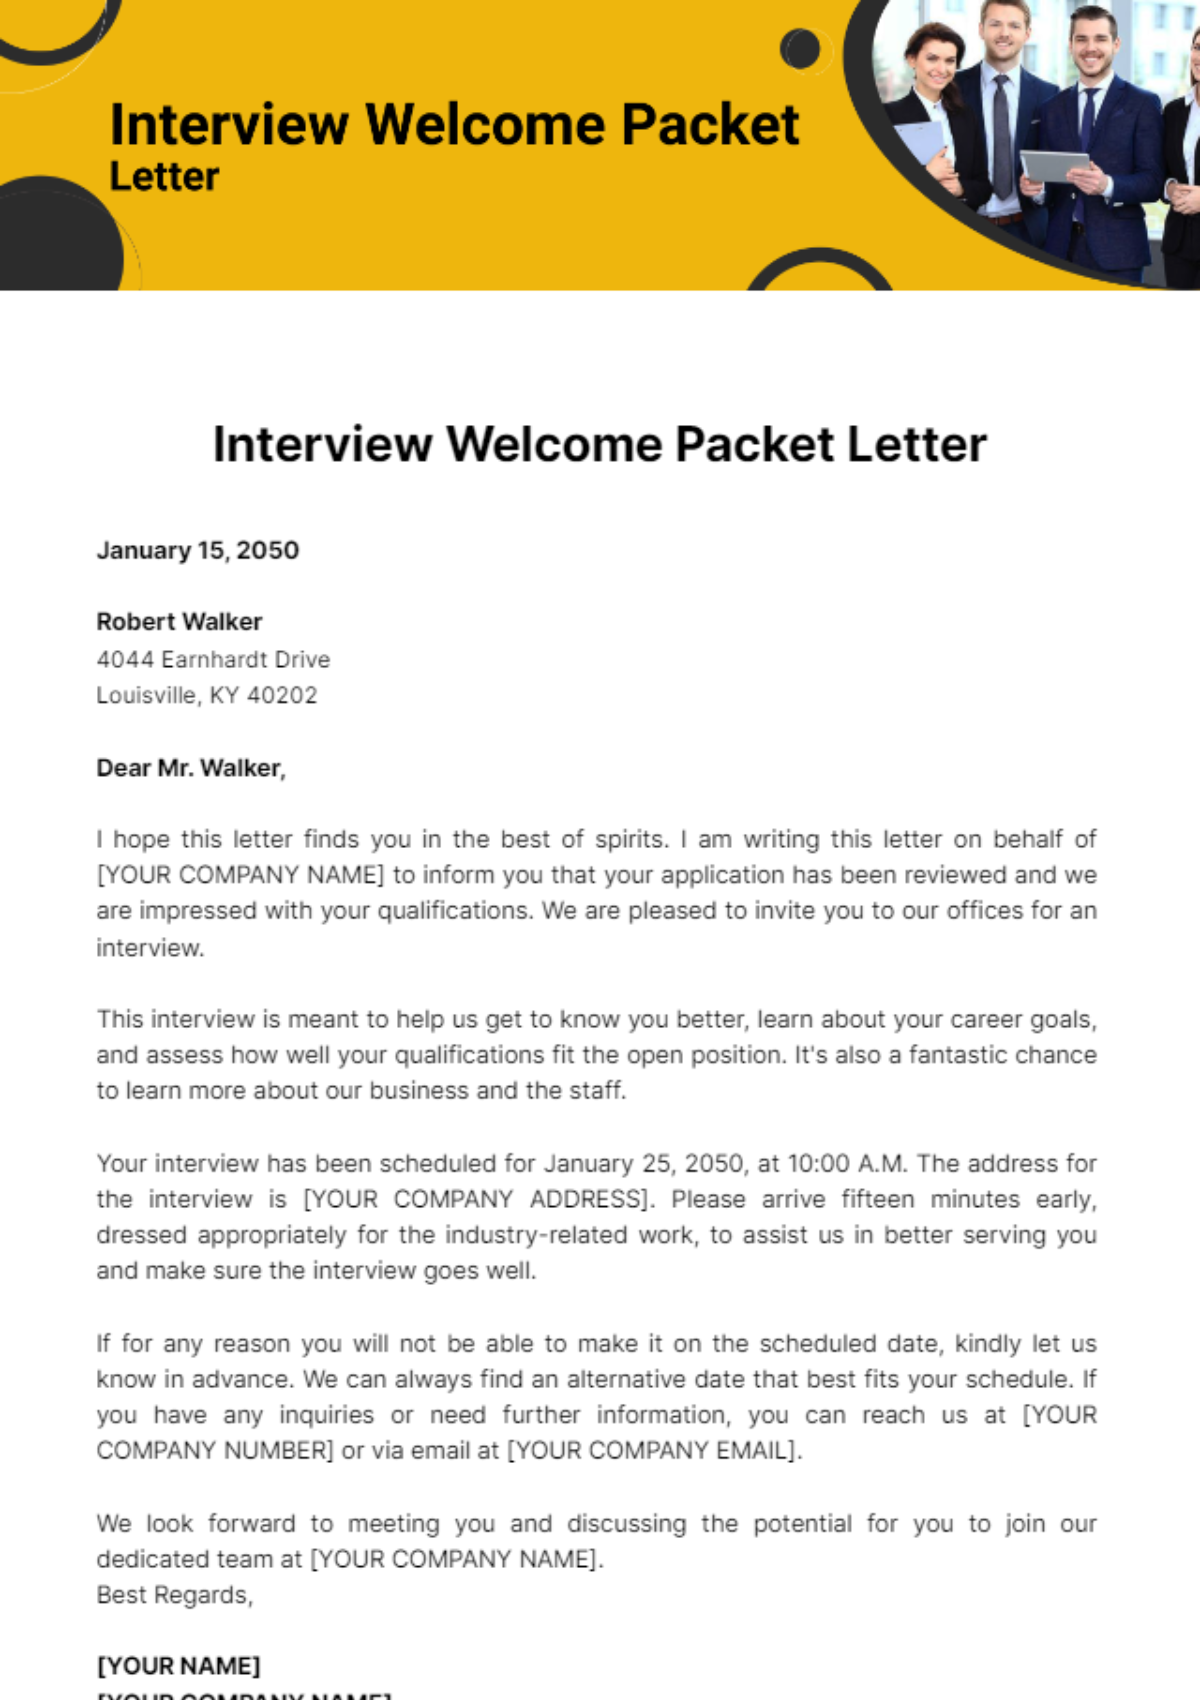 Free Interview Welcome Packet Letter Template